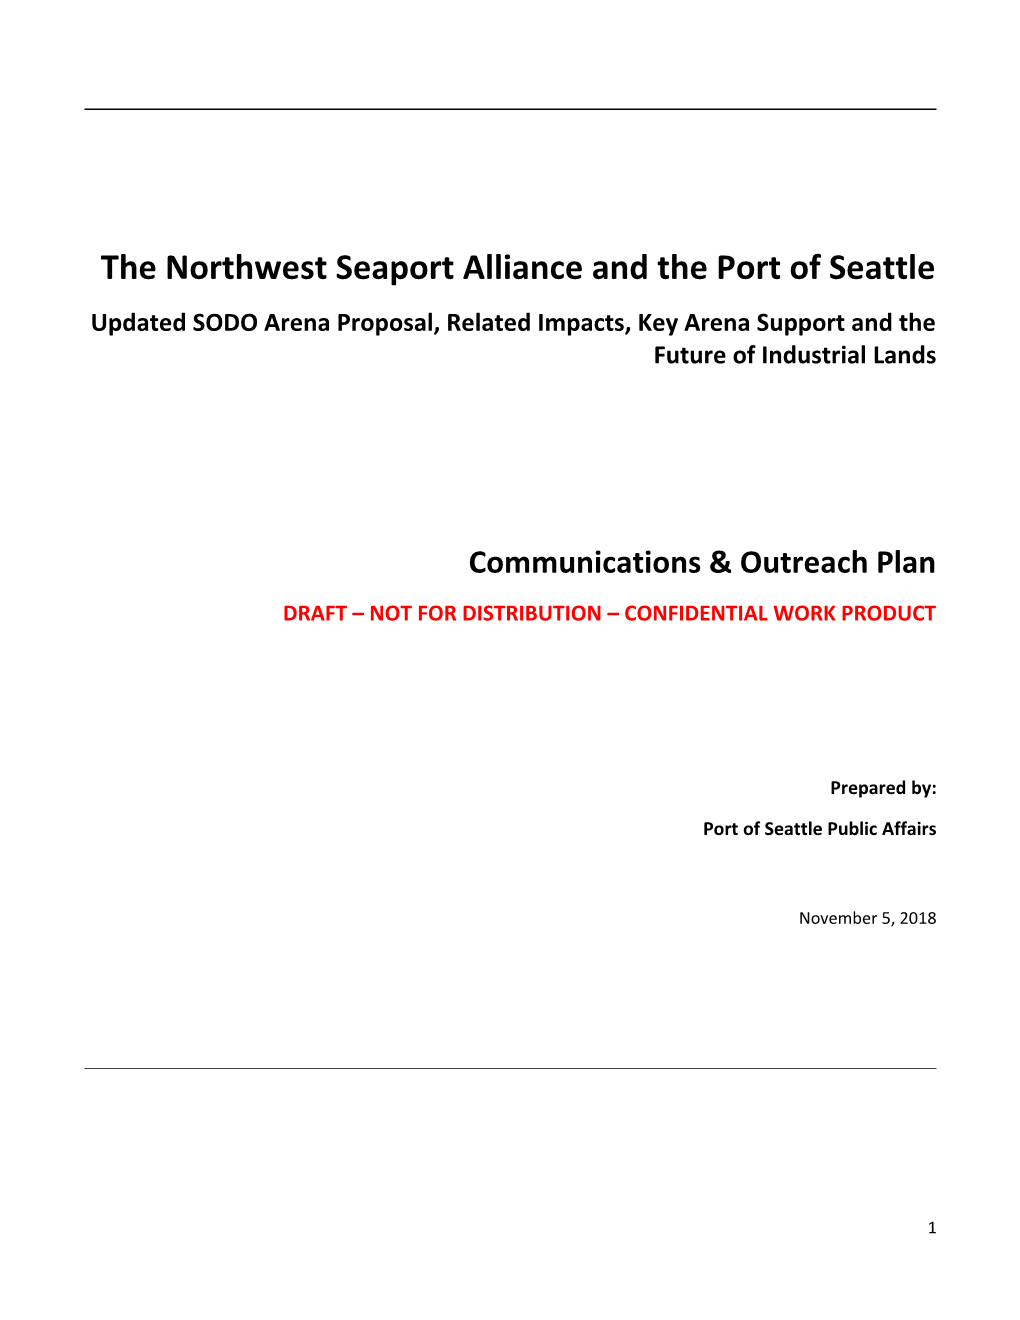 The Northwest Seaport Alliance and the Port of Seattle